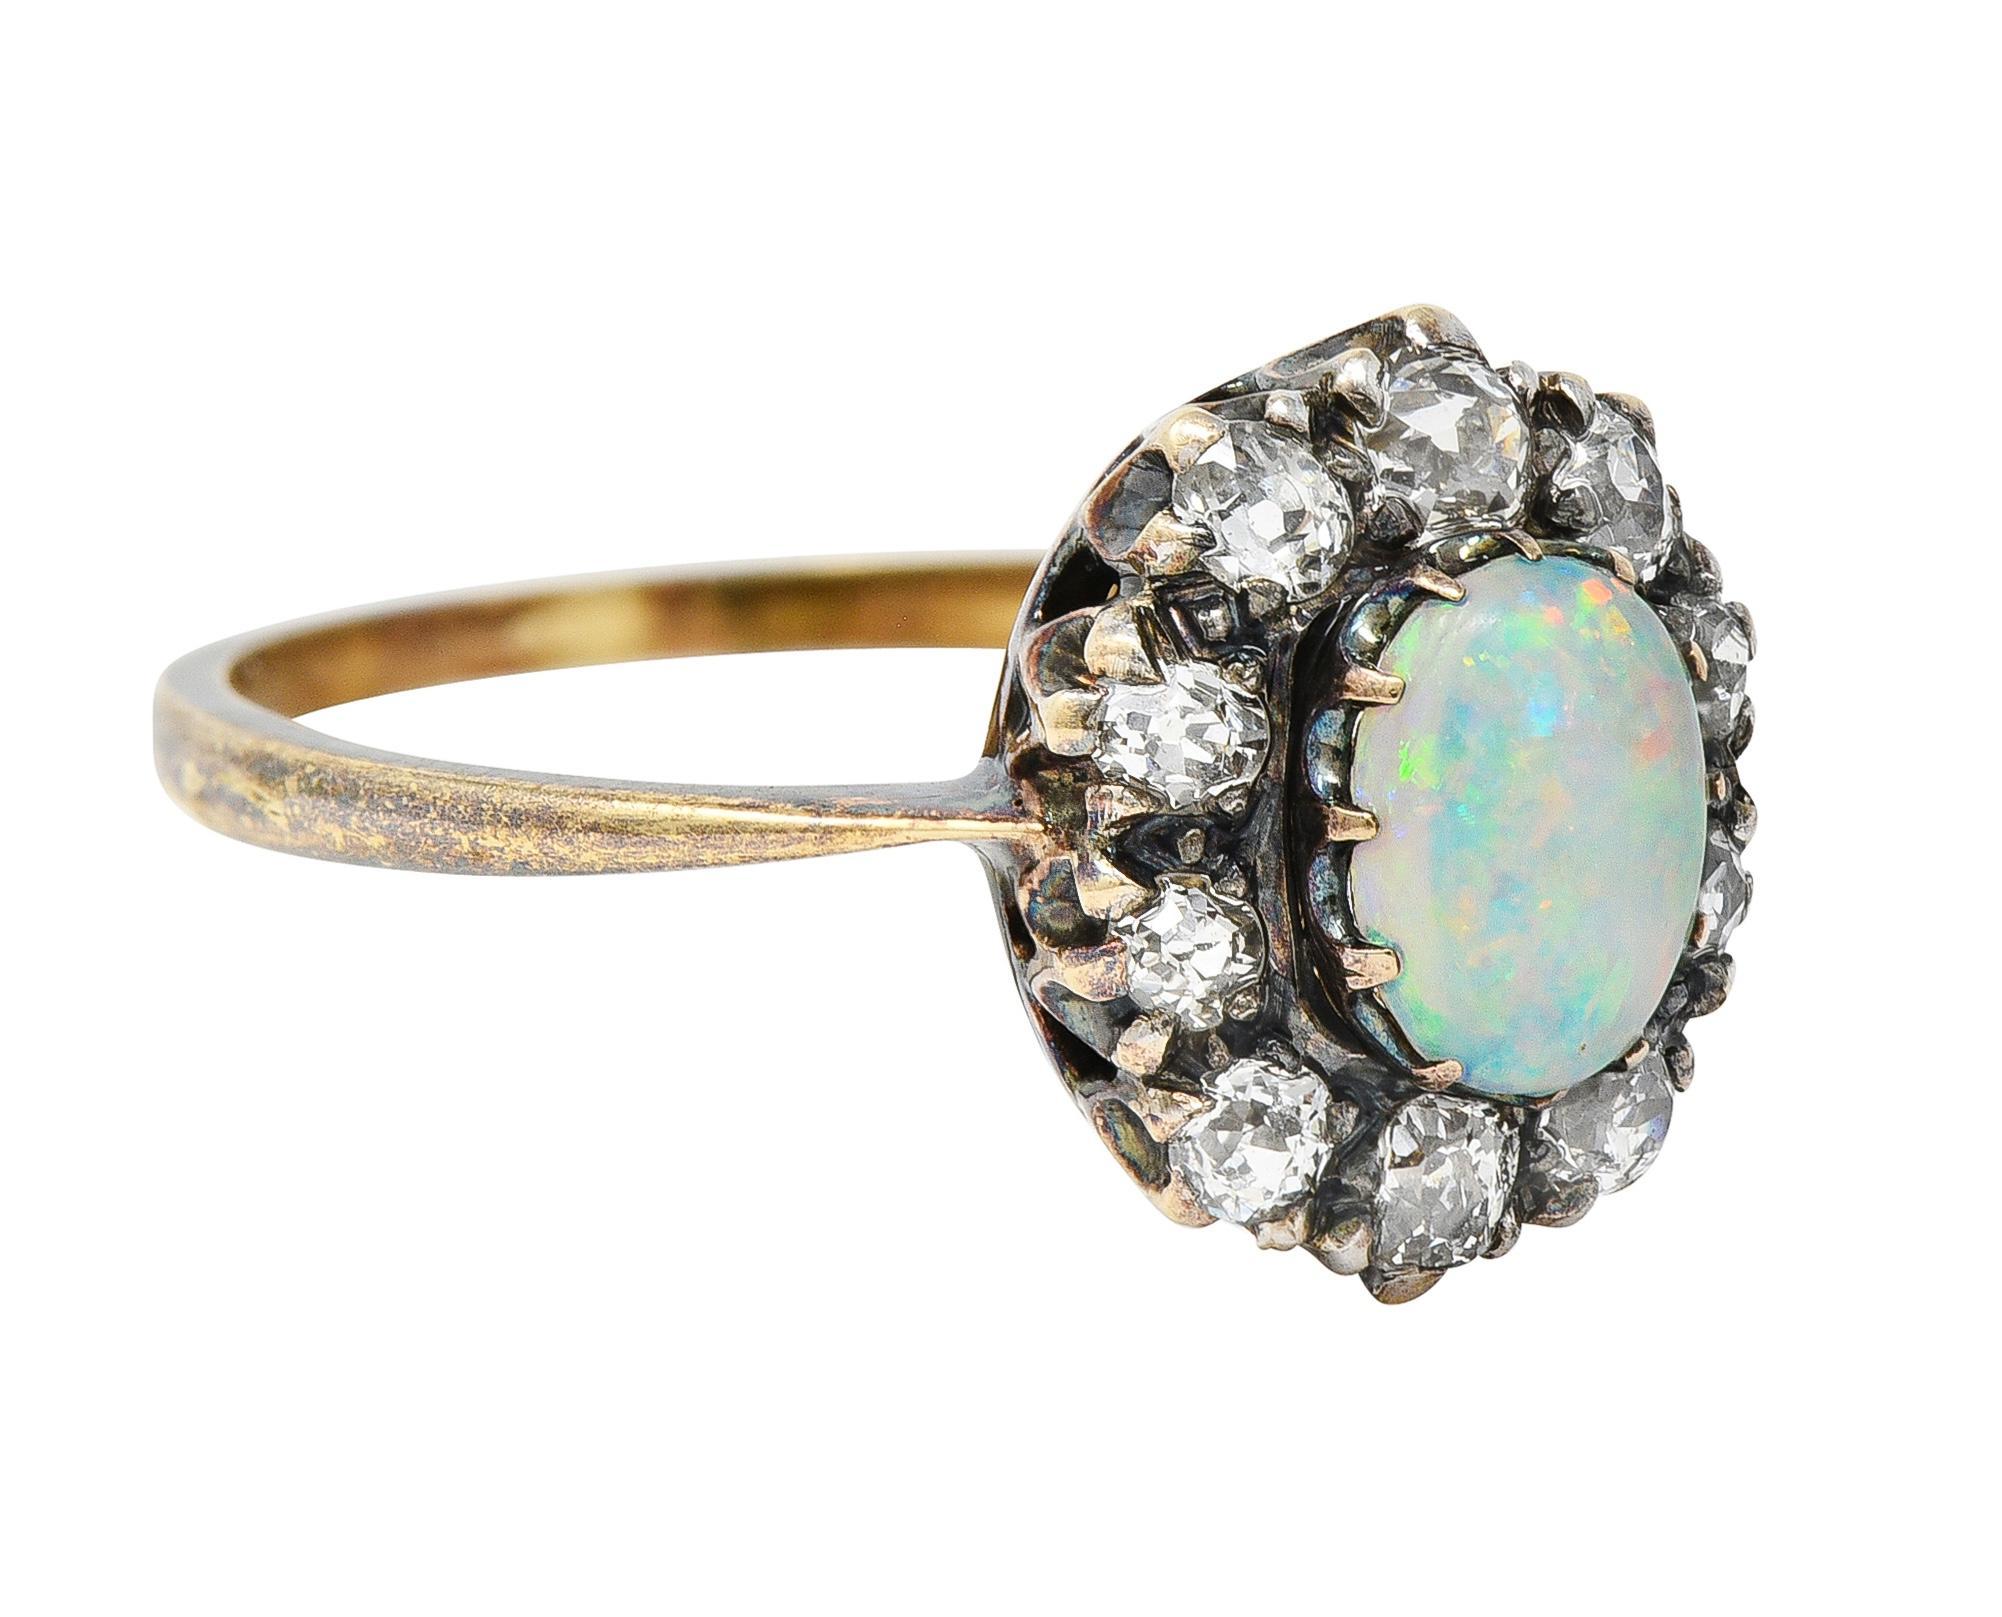 Centering an oval shaped opal cabochon measuring 6.5 x 5.0 mm 
Translucent white body color with spectral play-of-color
With a recessed halo surround all prong set in silver-topped gold
Halo is comprised of old mine cut diamonds 
Weighing